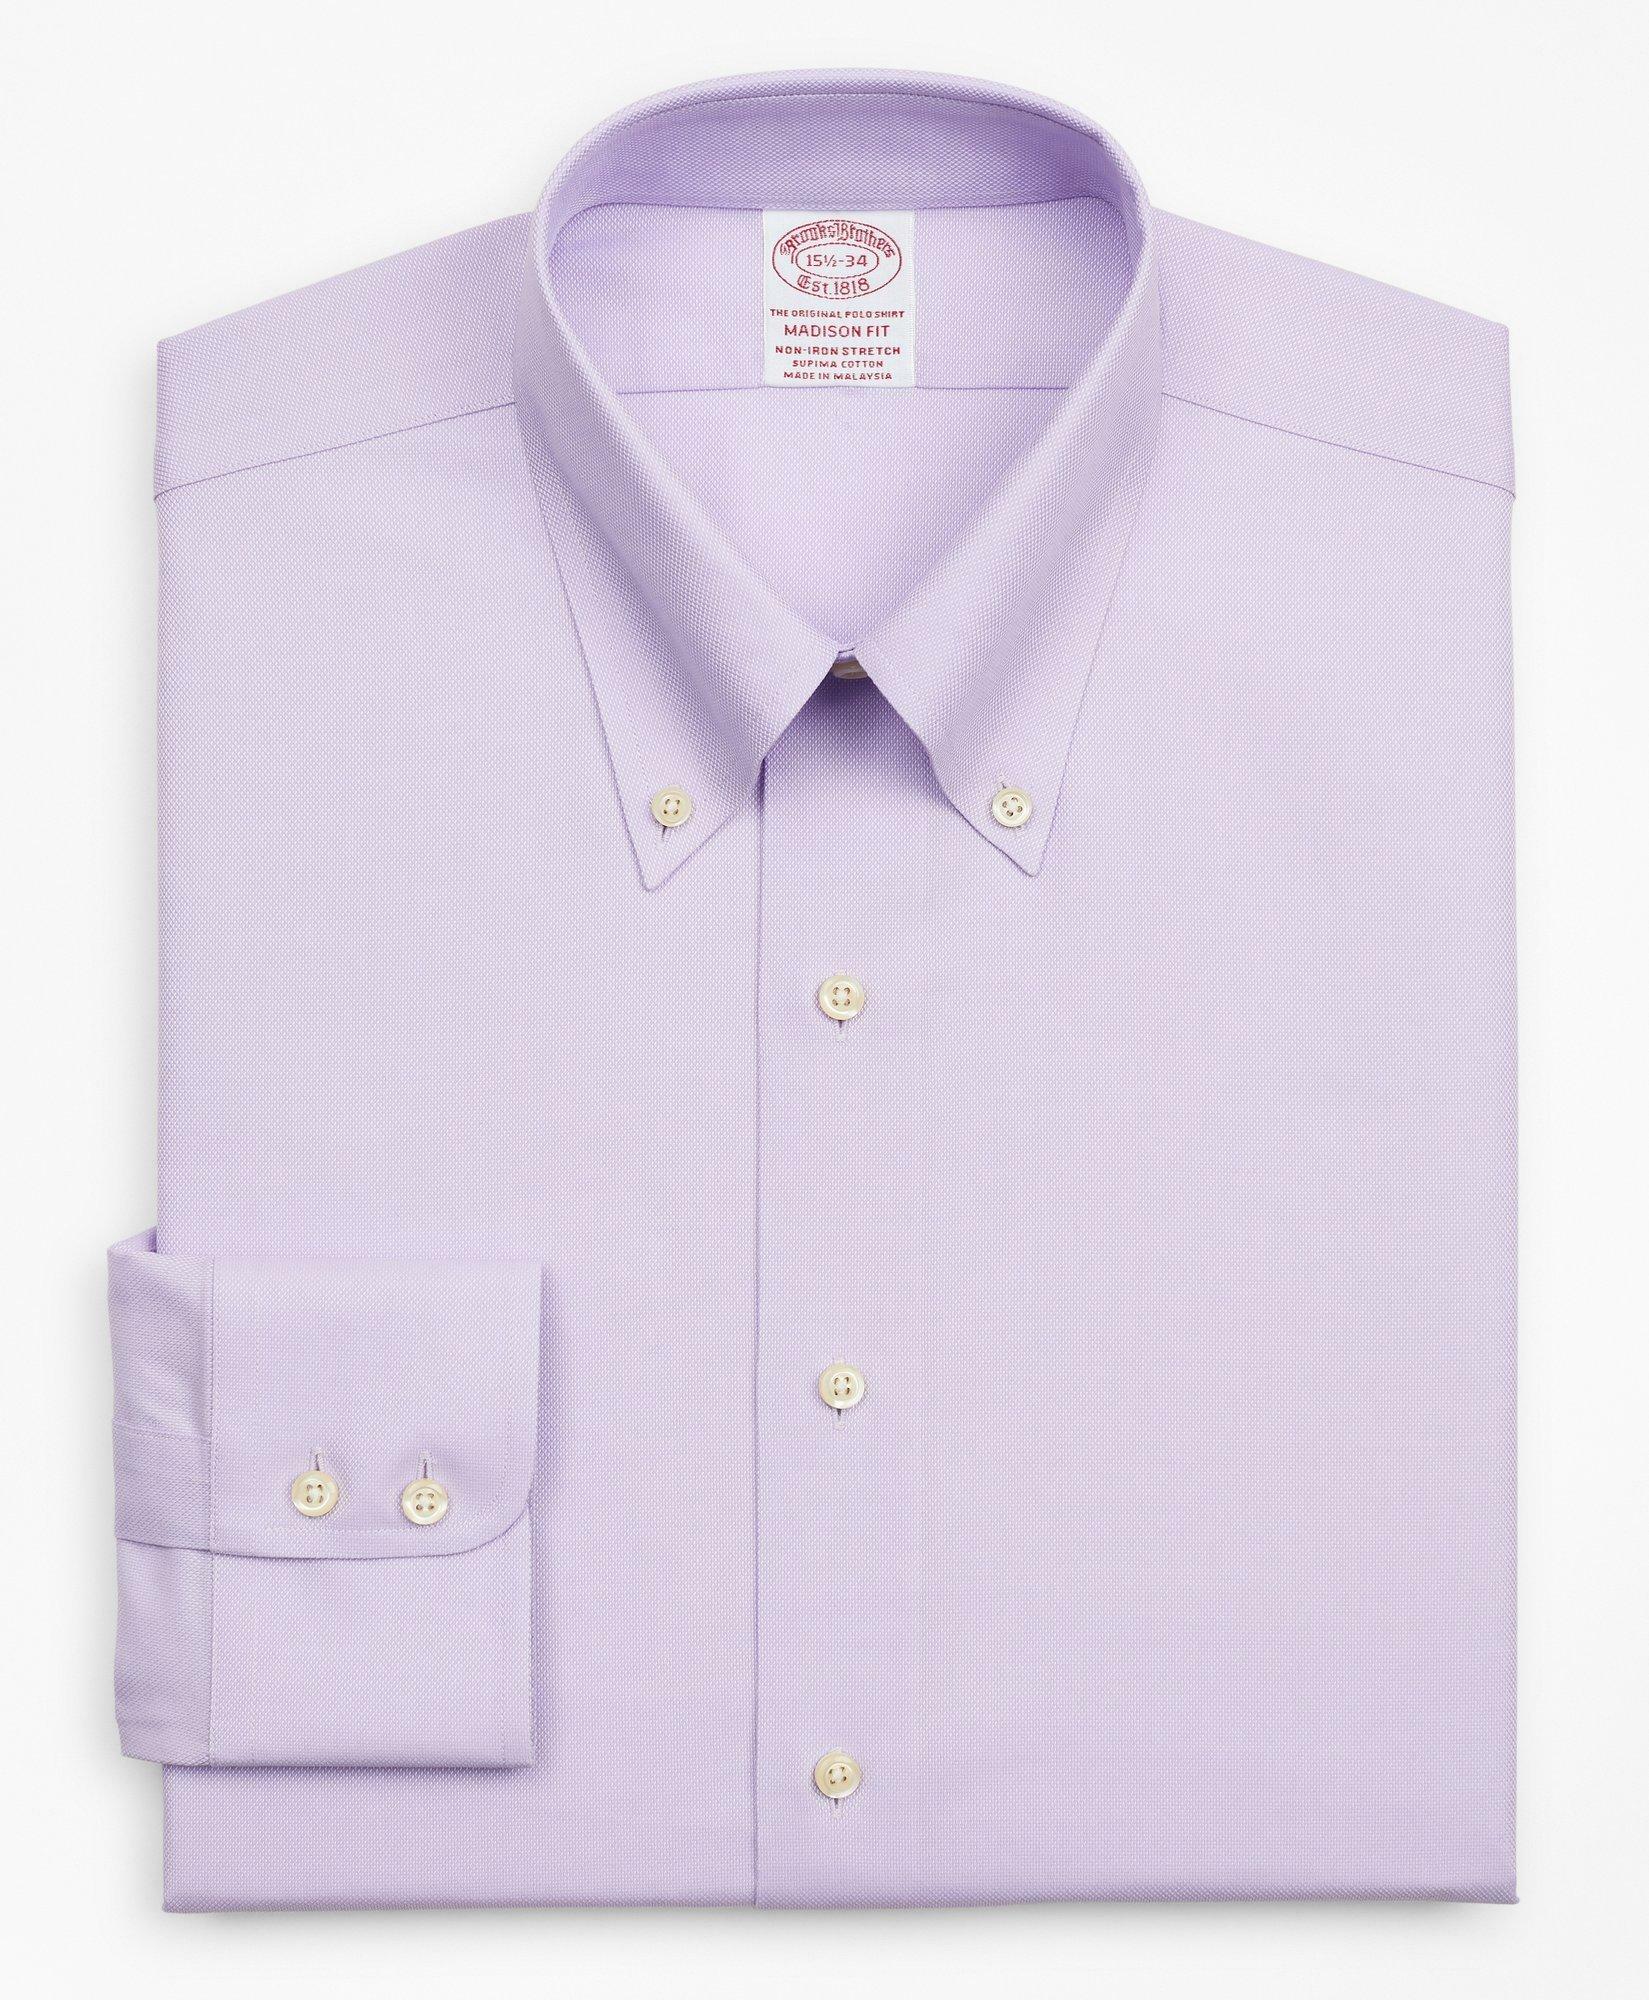 Brooks Brothers Men's Stretch Madison Relaxed-Fit Dress Shirt, Non-Iron Royal Oxford Button-Down Collar | Lavender